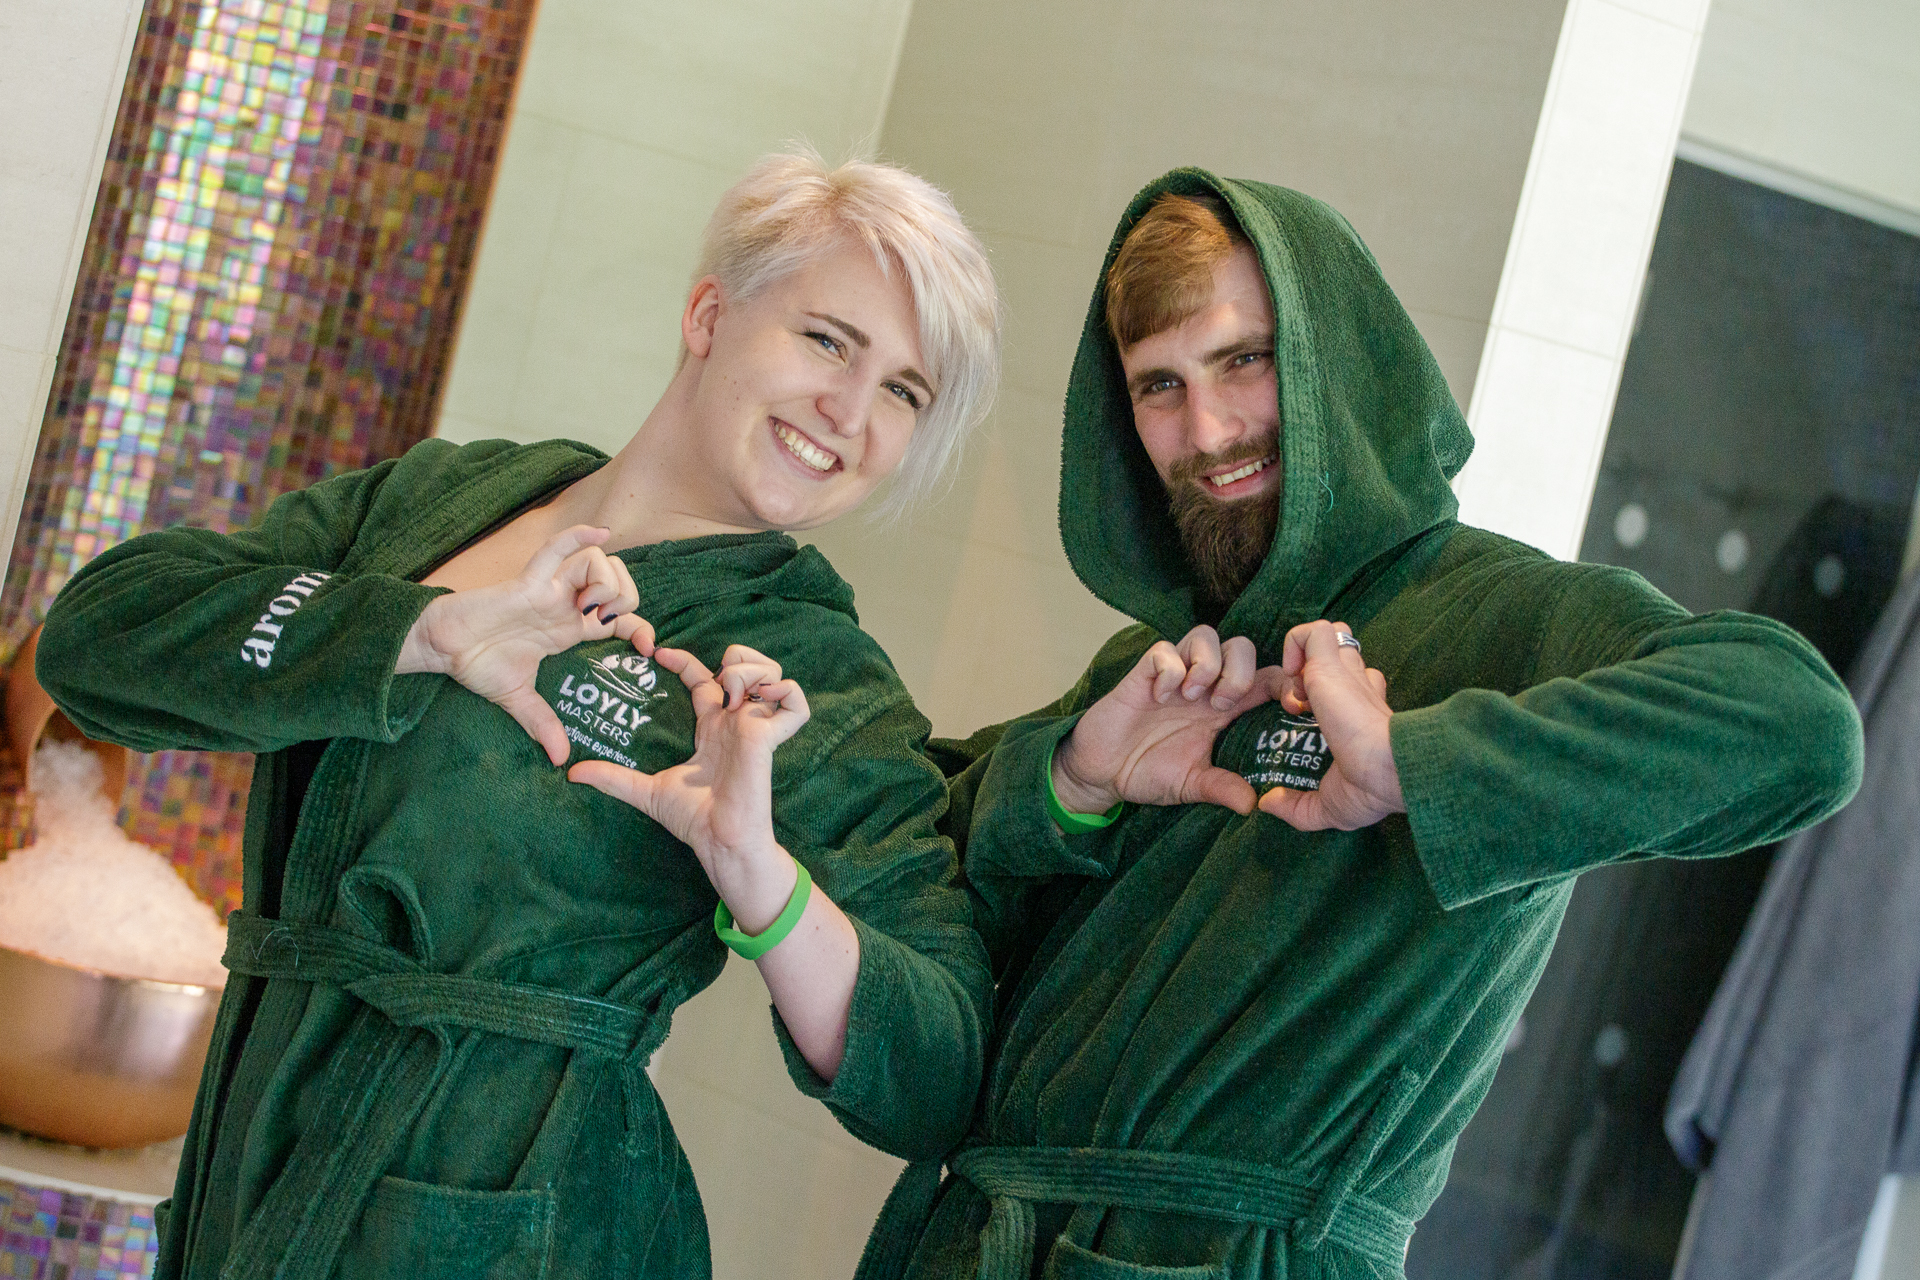 woman and man in green robes make heart shaped hands